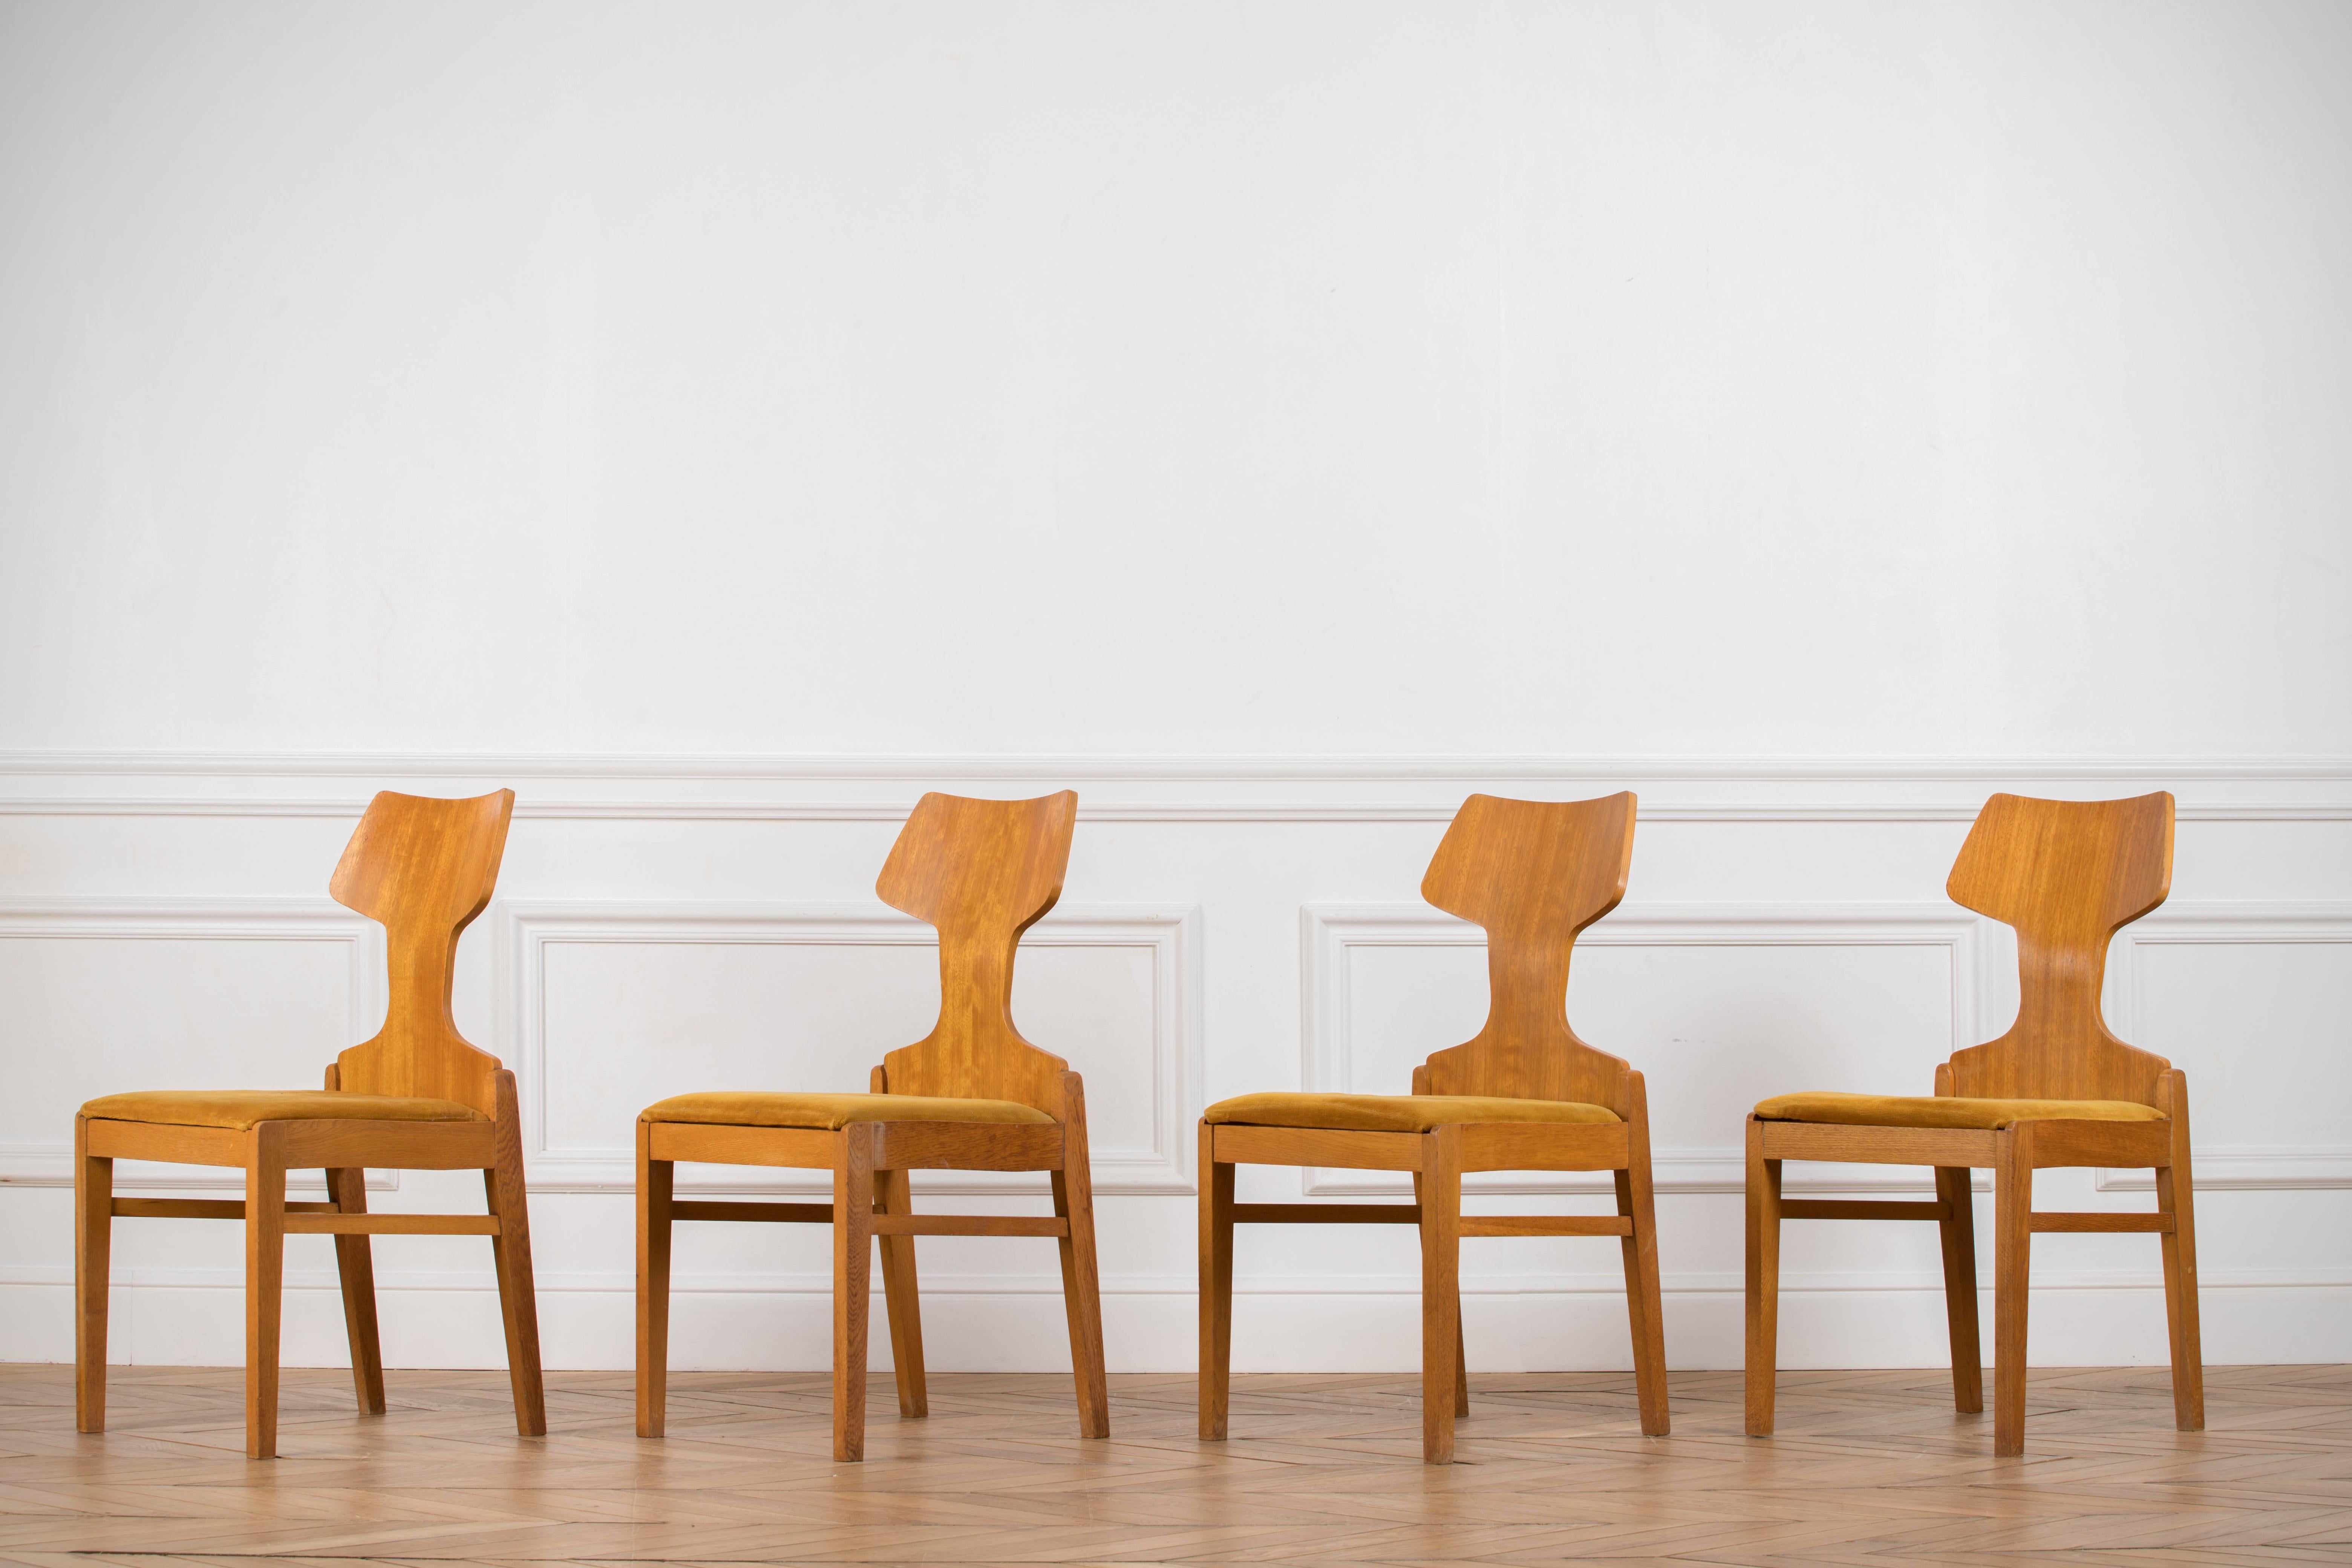 Set of four 1960s dining chairs designed by Alphonse Loebenstein for Meredew (Stamped by maker).
Oak bases and bent plywood backs, veneered in beech.
Original mustard velvet upholstery in good condition.
There is some discreet watermarks and